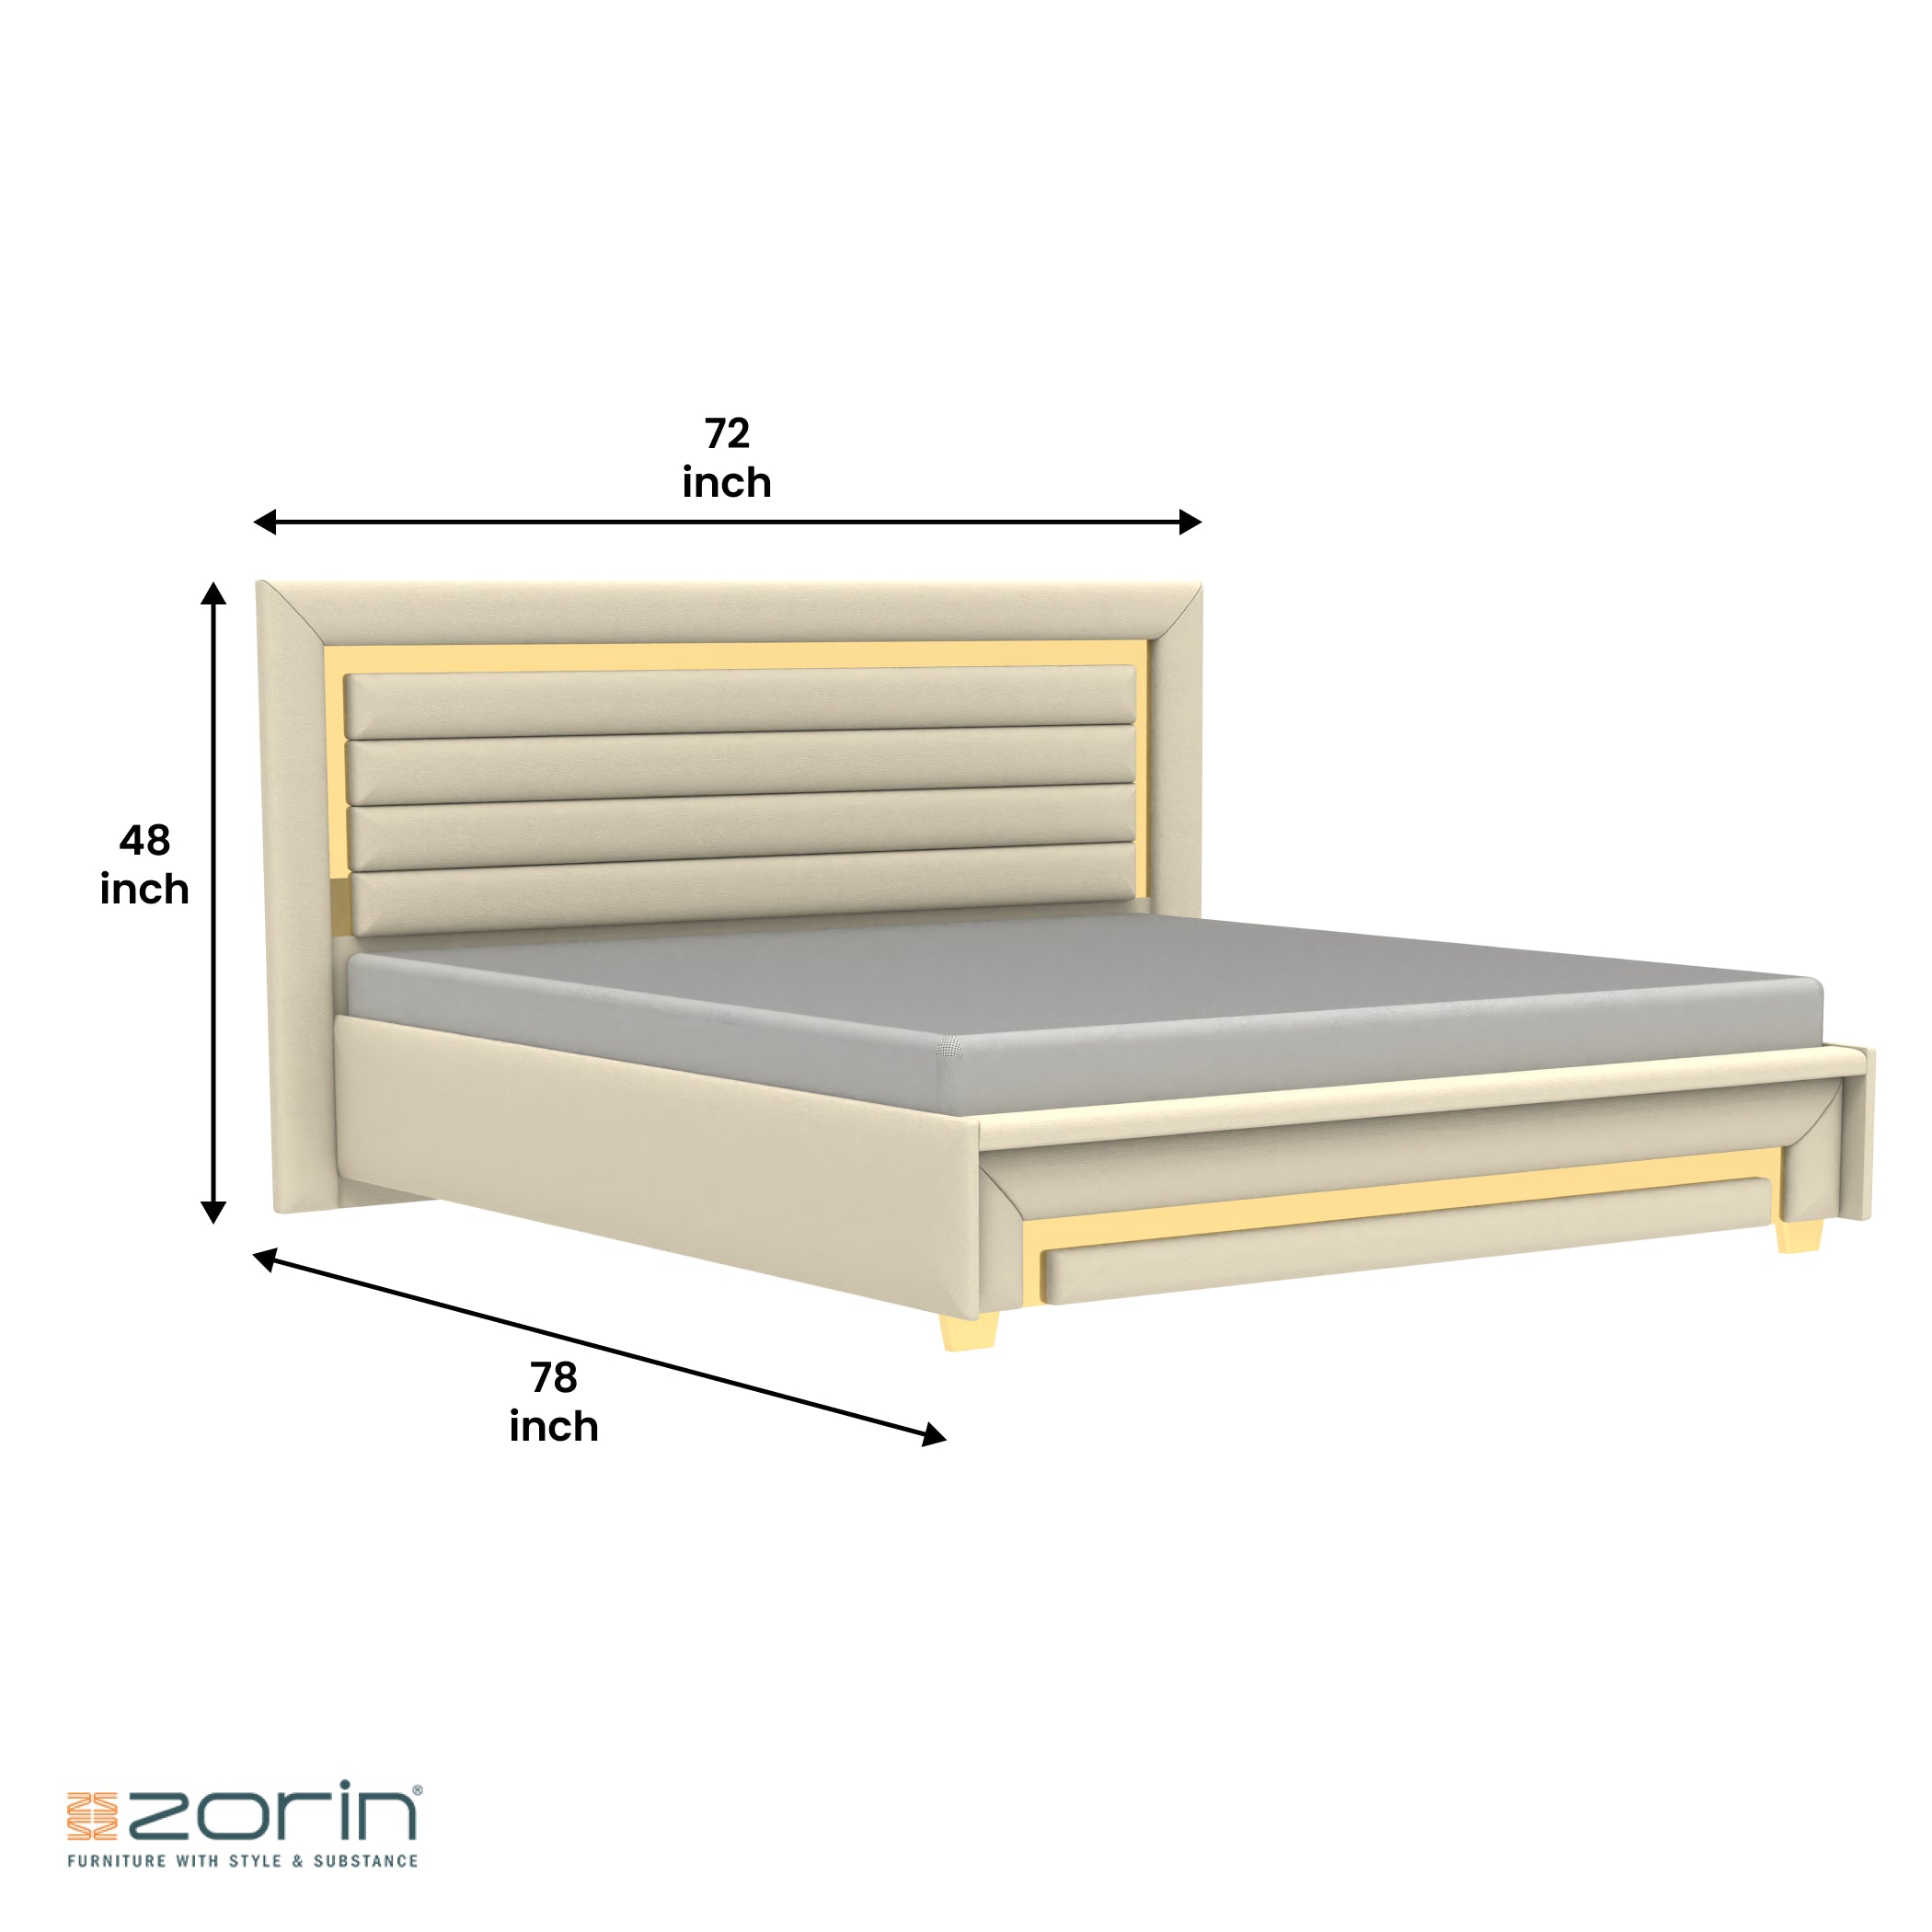 Roger King Bed With Storage Zorin